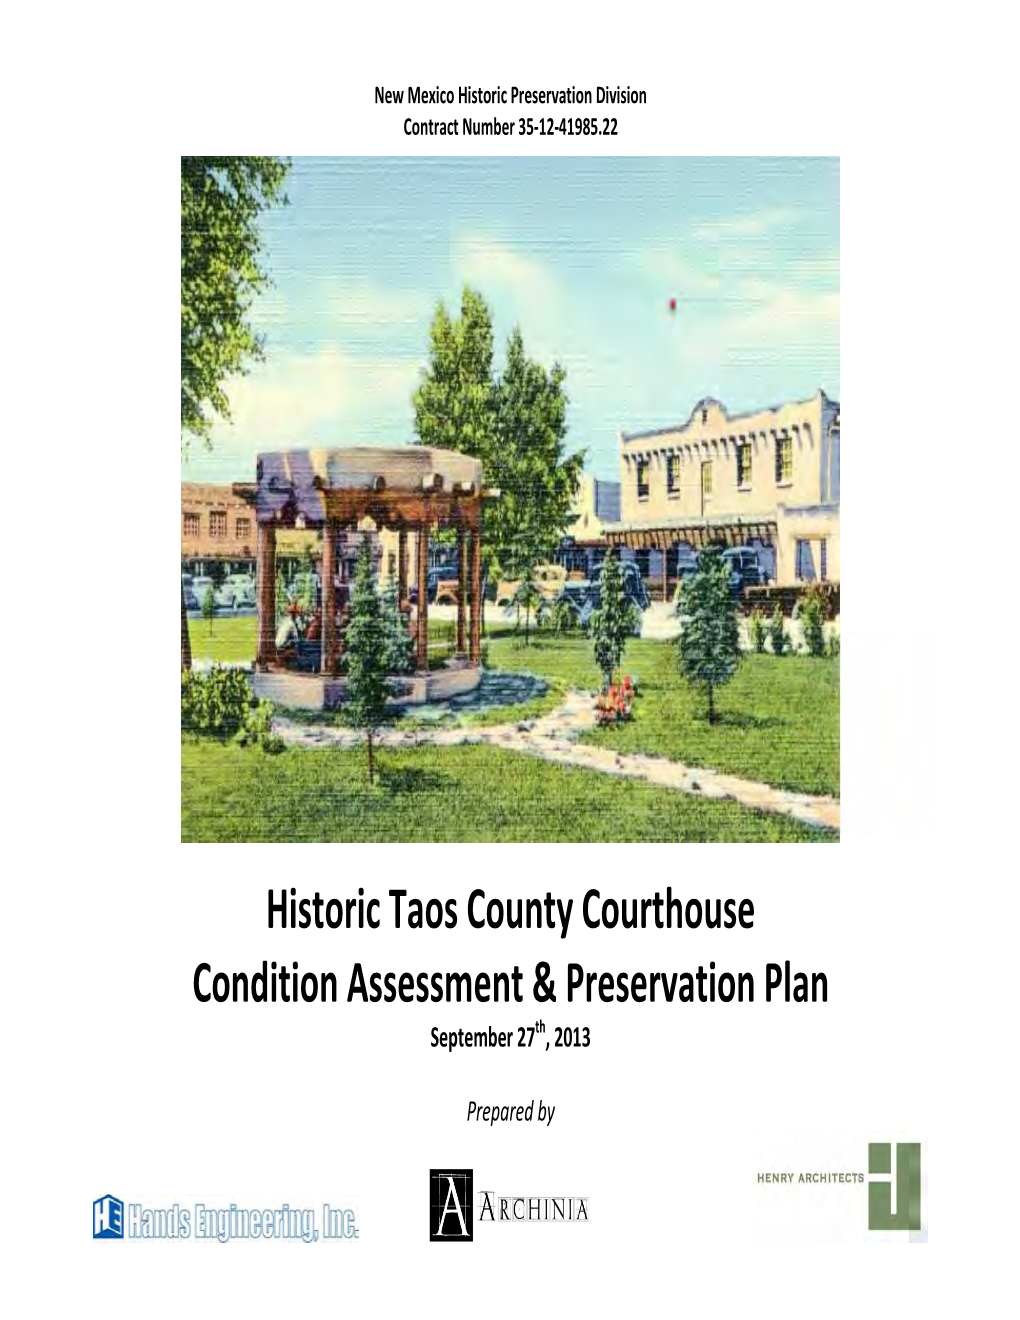 Historic Taos County Courthouse Condition Assessment & Preservation Plan September 27Th, 2013